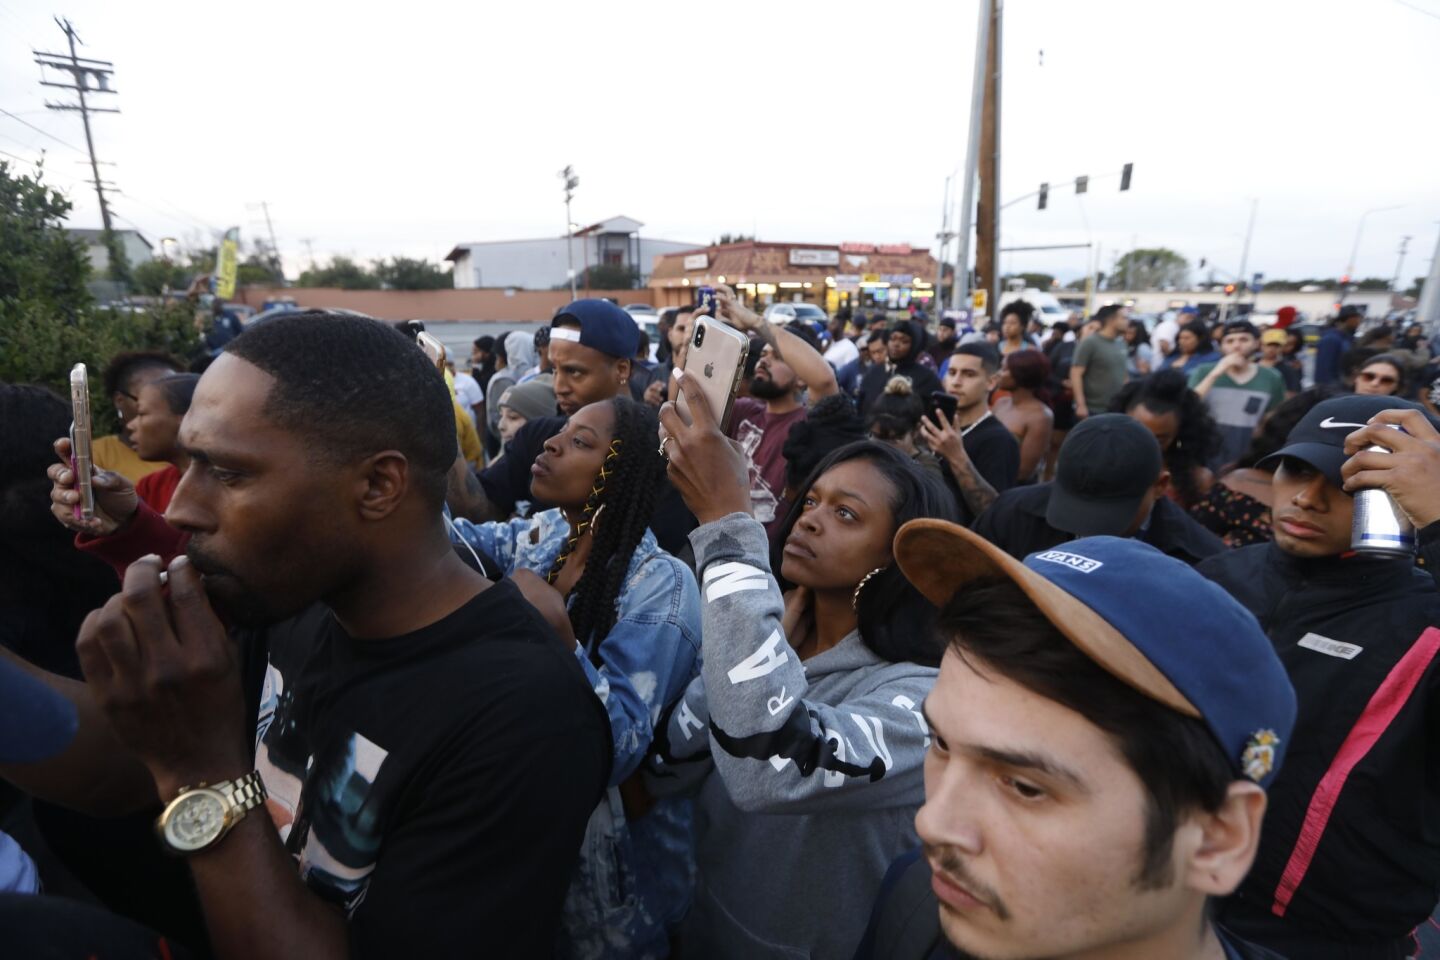 A crowd of people gathers at the scene where rapper Nipsey Hussle was killed Sunday.